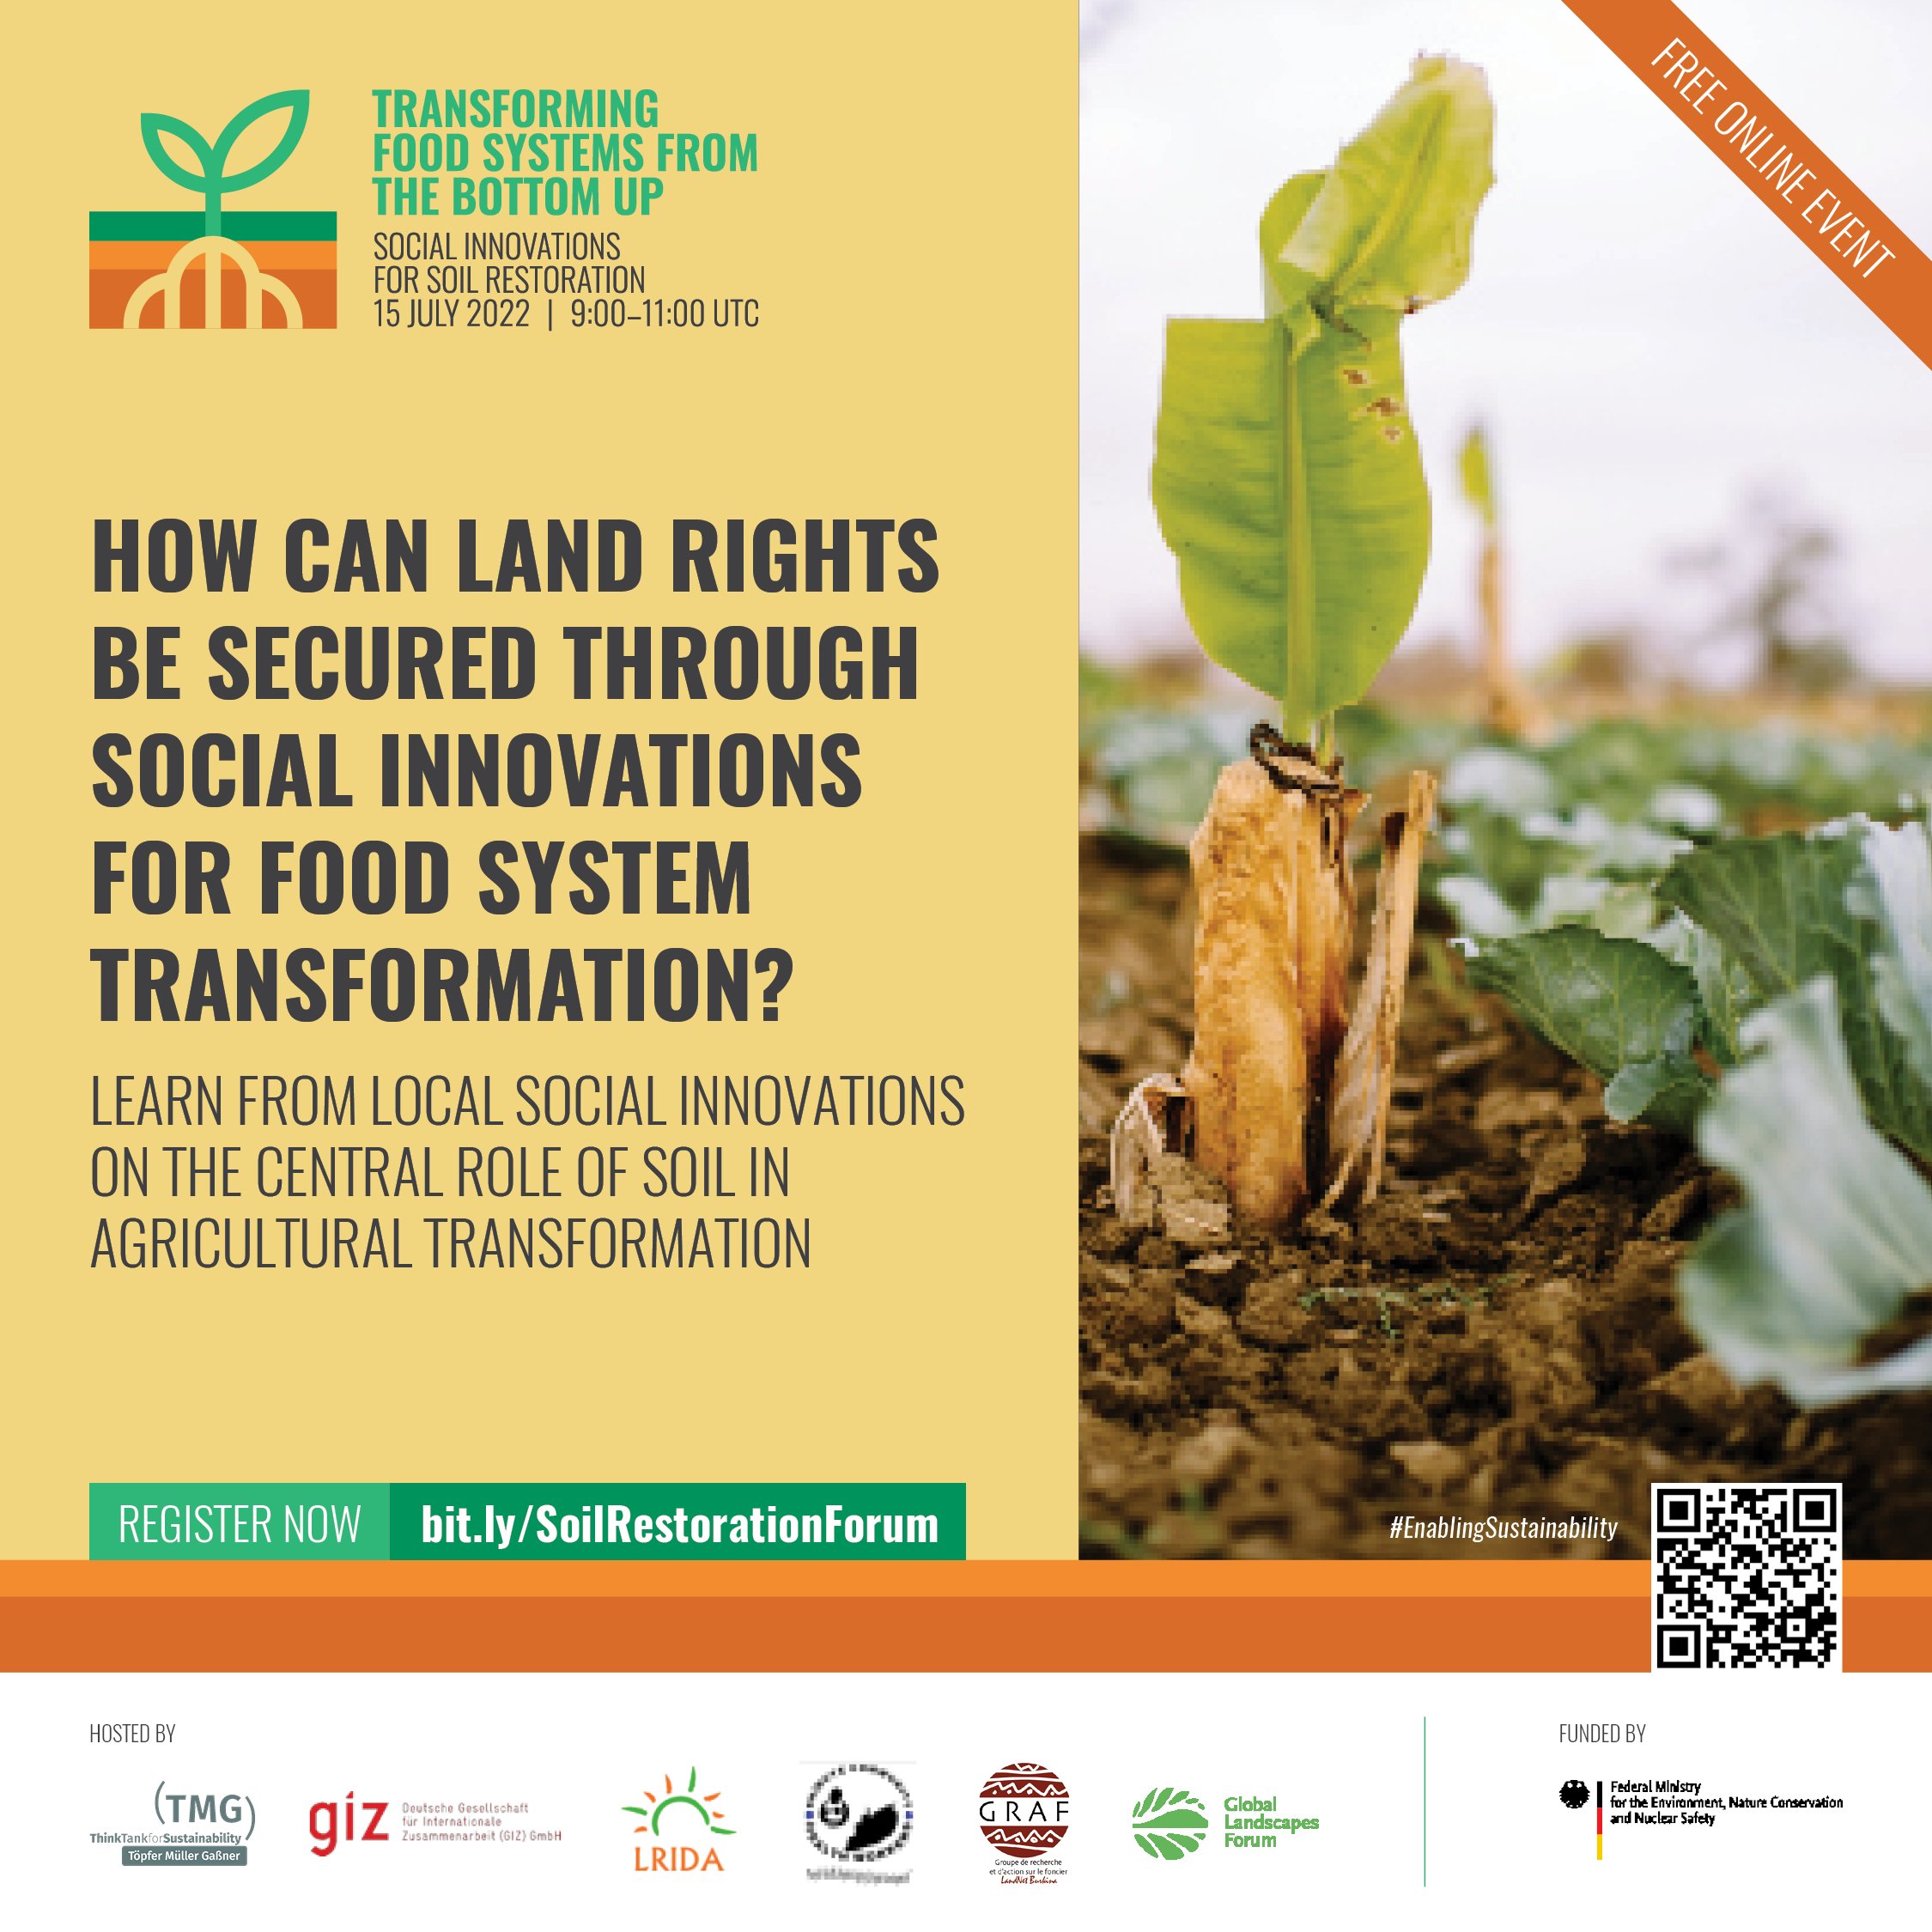 Transforming food systems from the bottom up: Social innovations for soil restoration